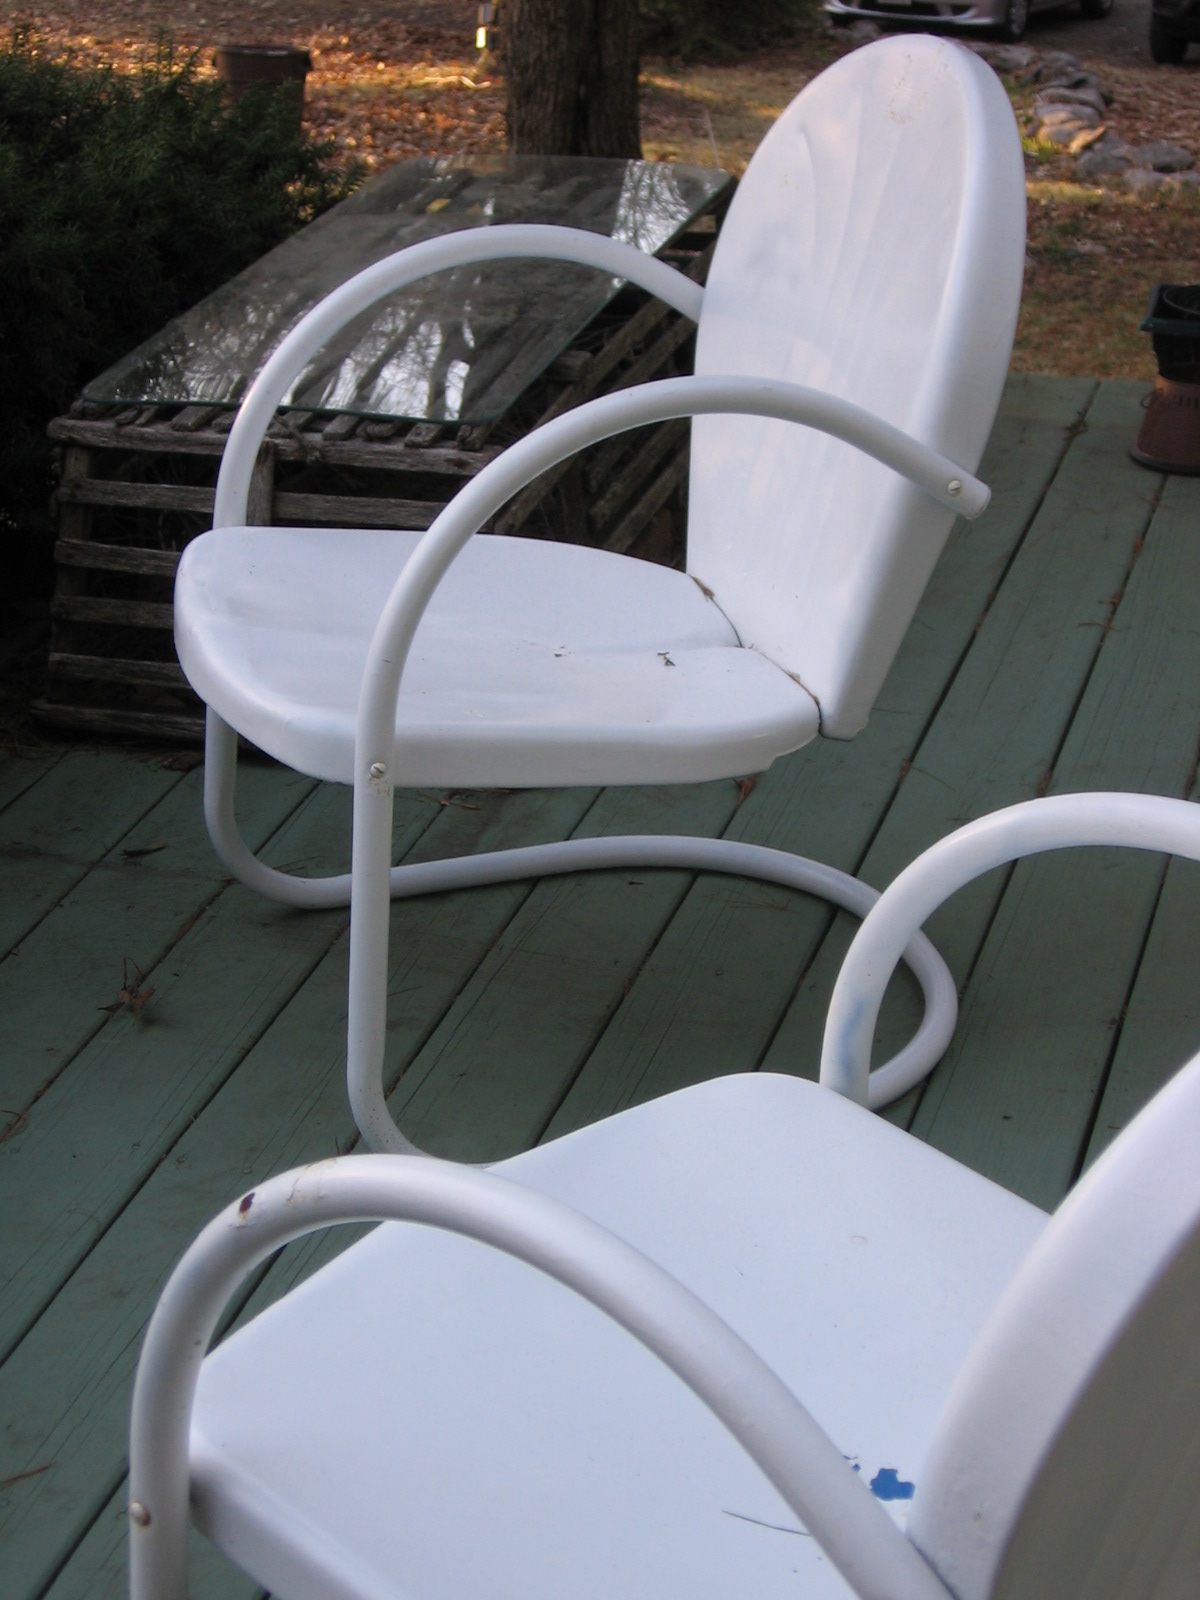 [Chairs+on+my+parent's+porch-first+nice+day+of+spring.JPG]